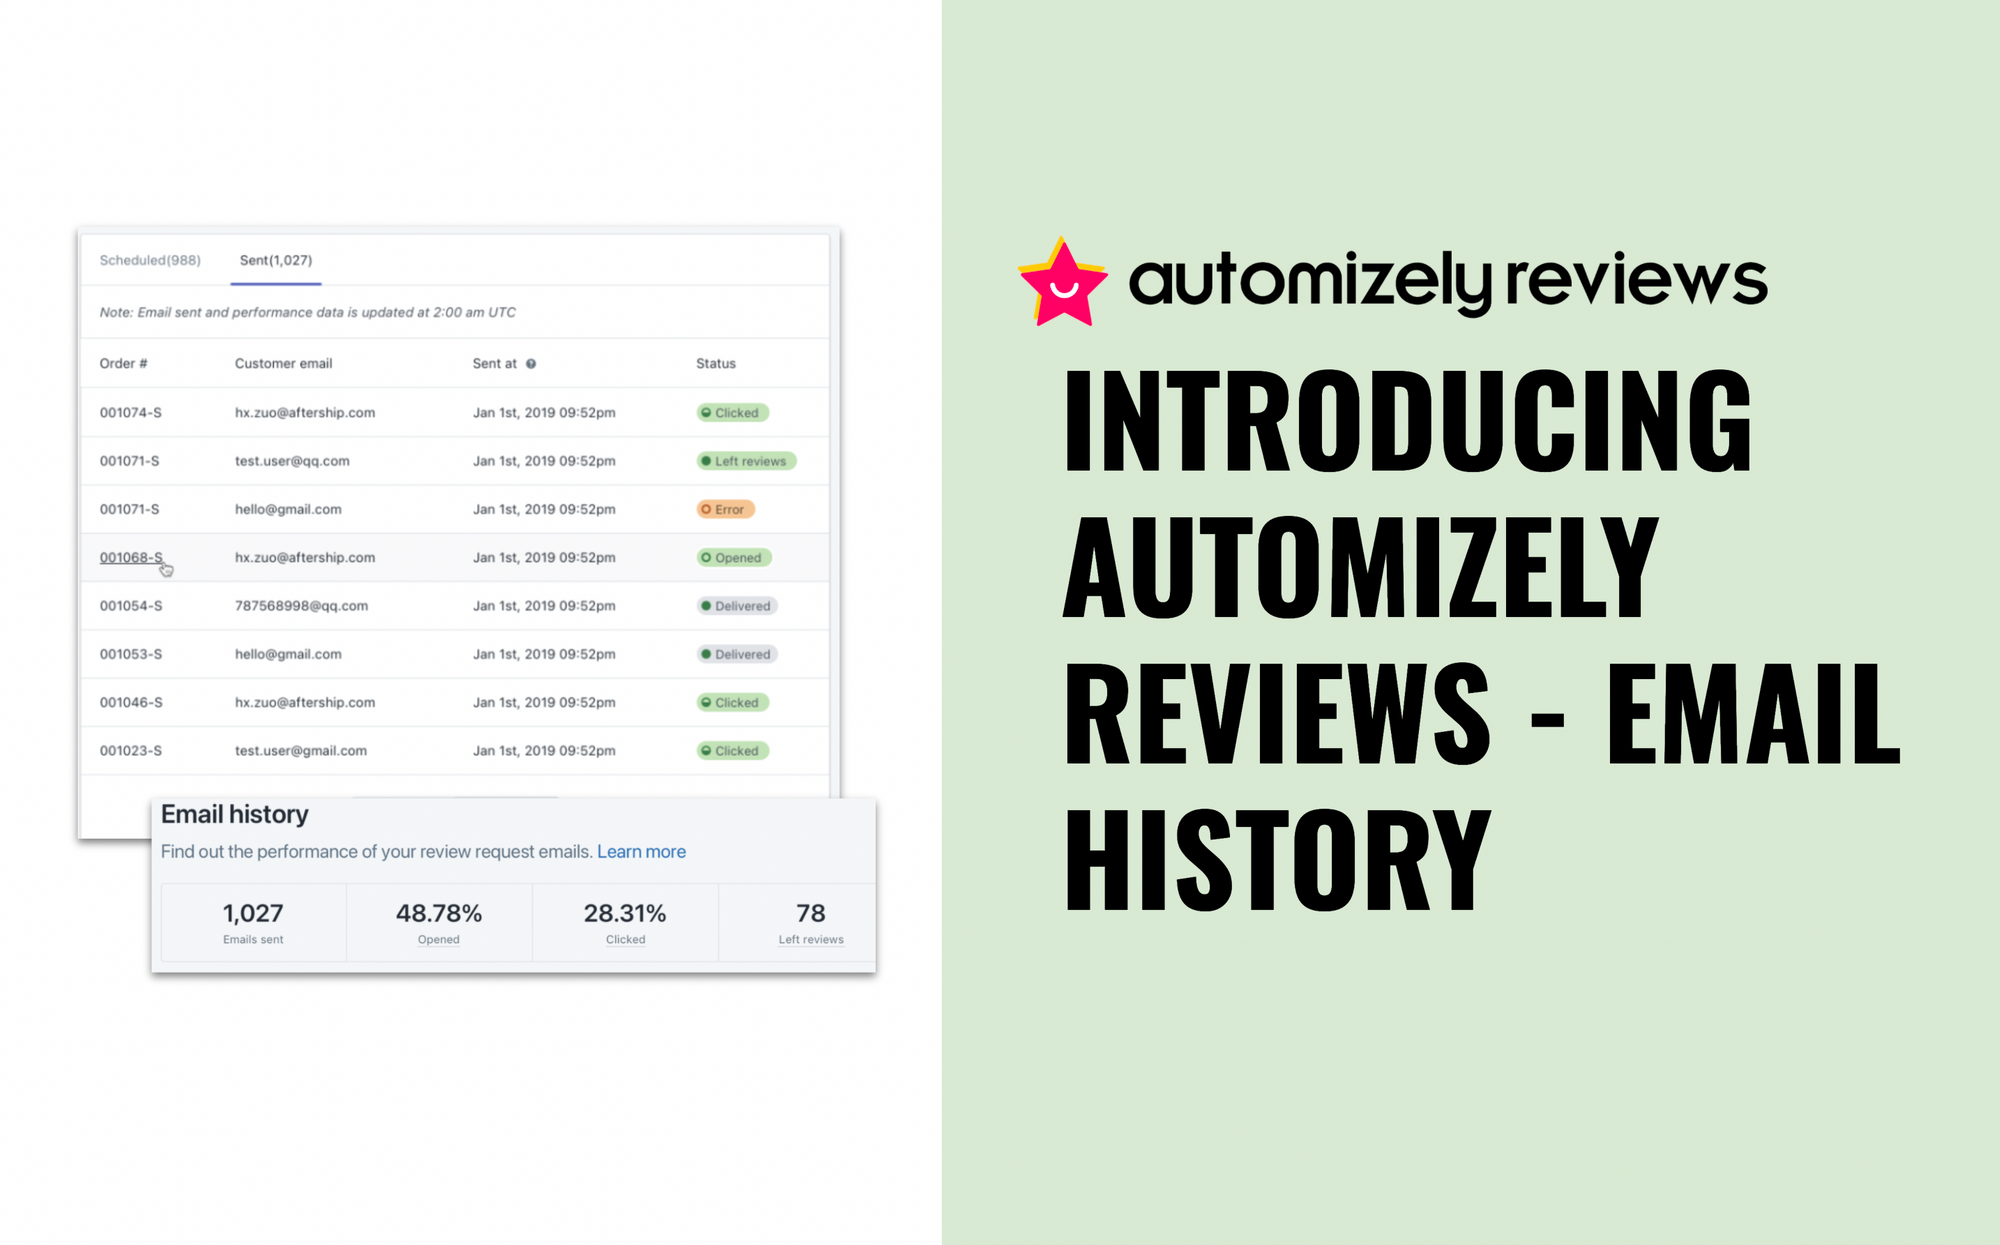 Supercharge Your Customer Feedback With Automizely Reviews Email History